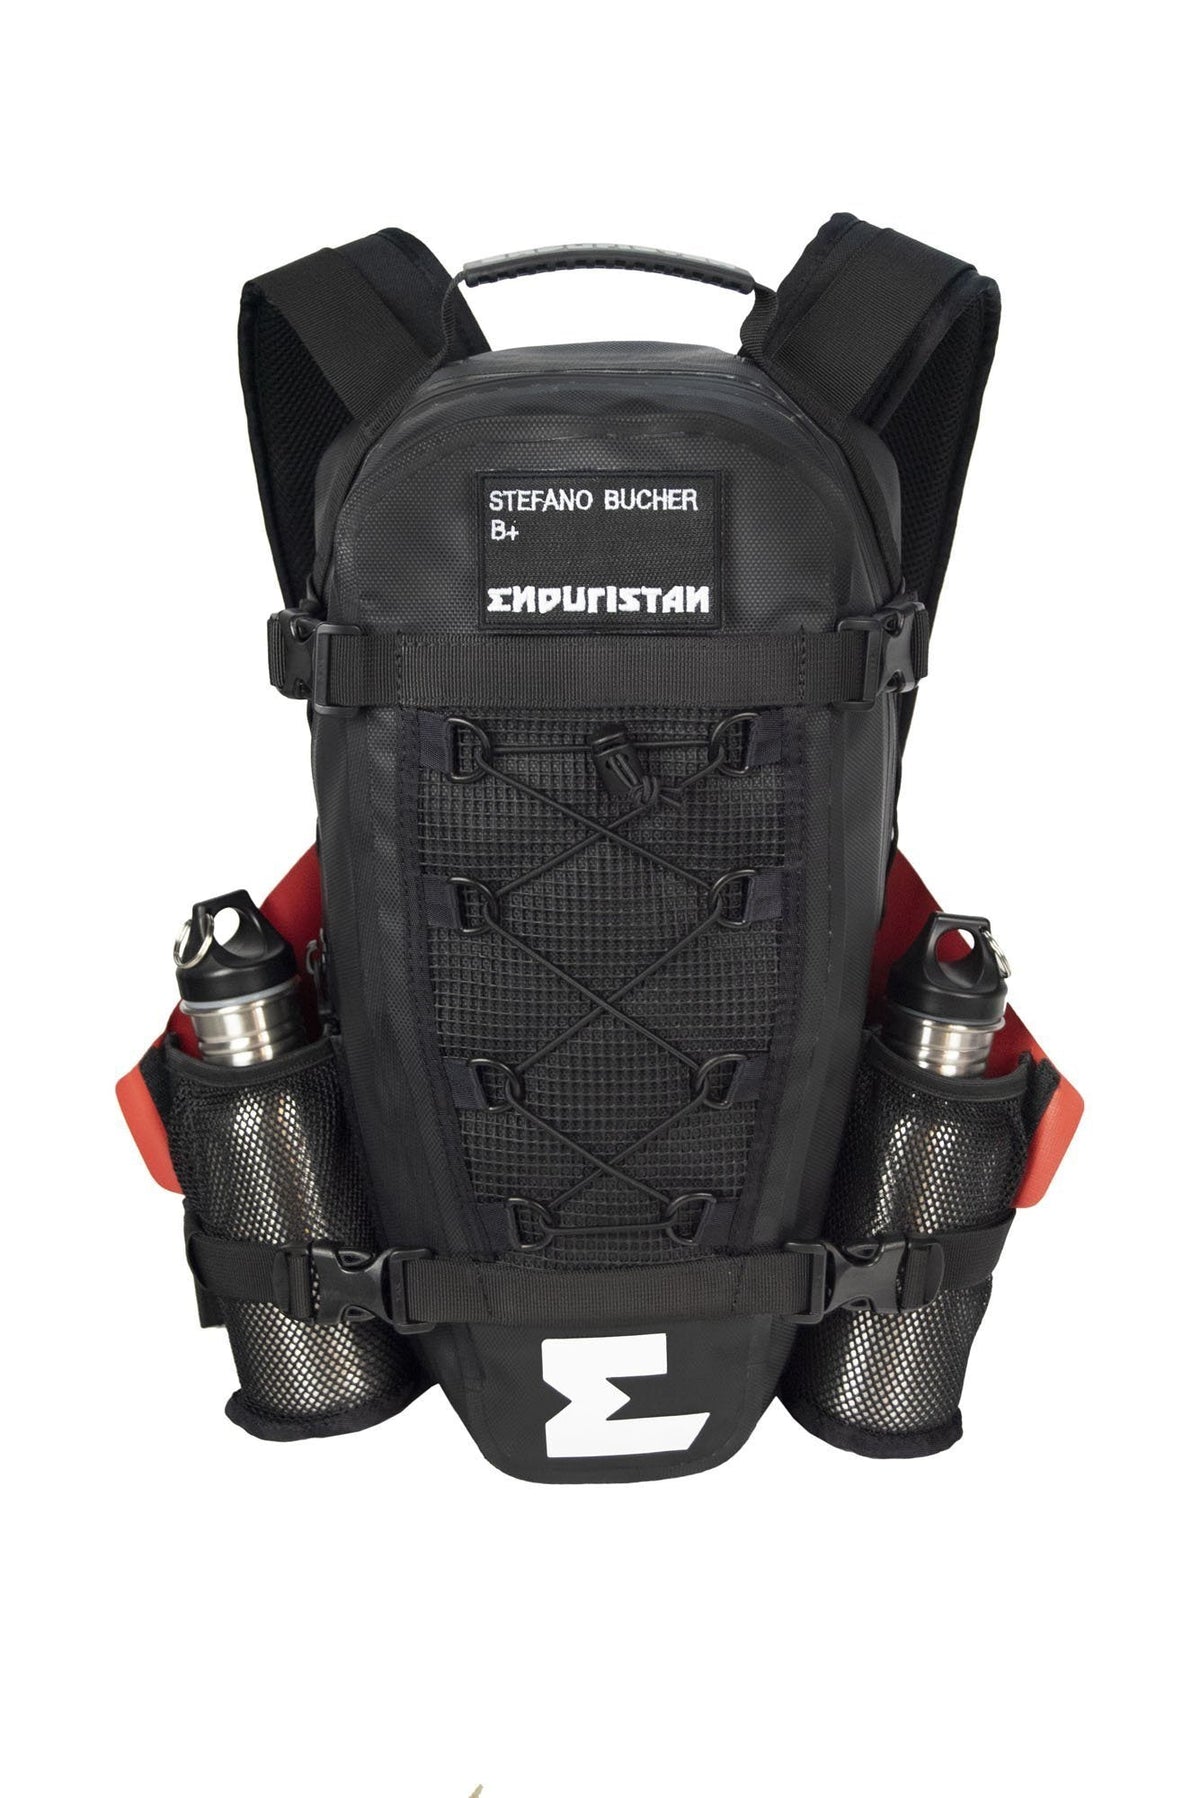 HURRICANE 15 RUCKSACK, LURU-001, enduristan, hurricane, luggage, rucksacks, waterproof, Rucksacks - Imported and distributed in North &amp; South America by Lindeco Genuine Powersports - Premier Powersports Equipment and Accessories for Motorcycle Enthusiasts, Professional Riders and Dealers.